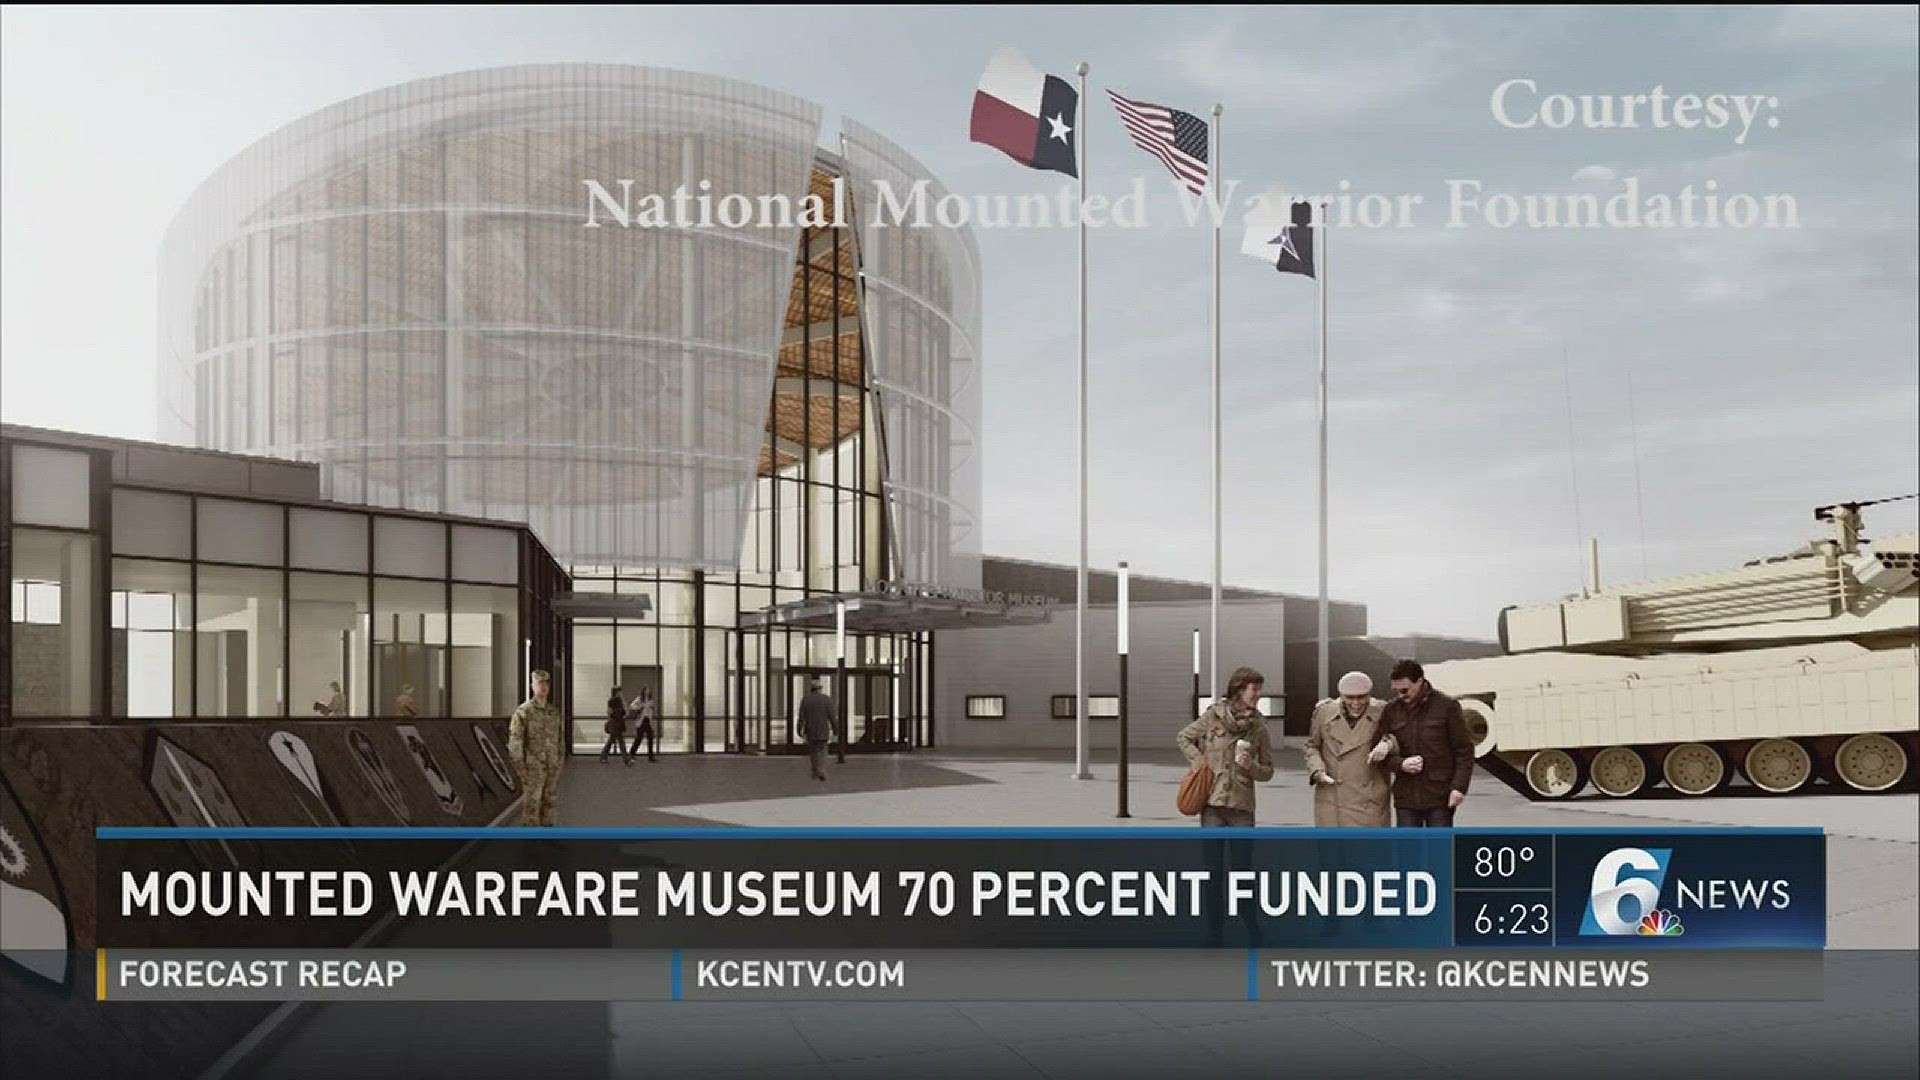 The Museum is 70 percent funded.